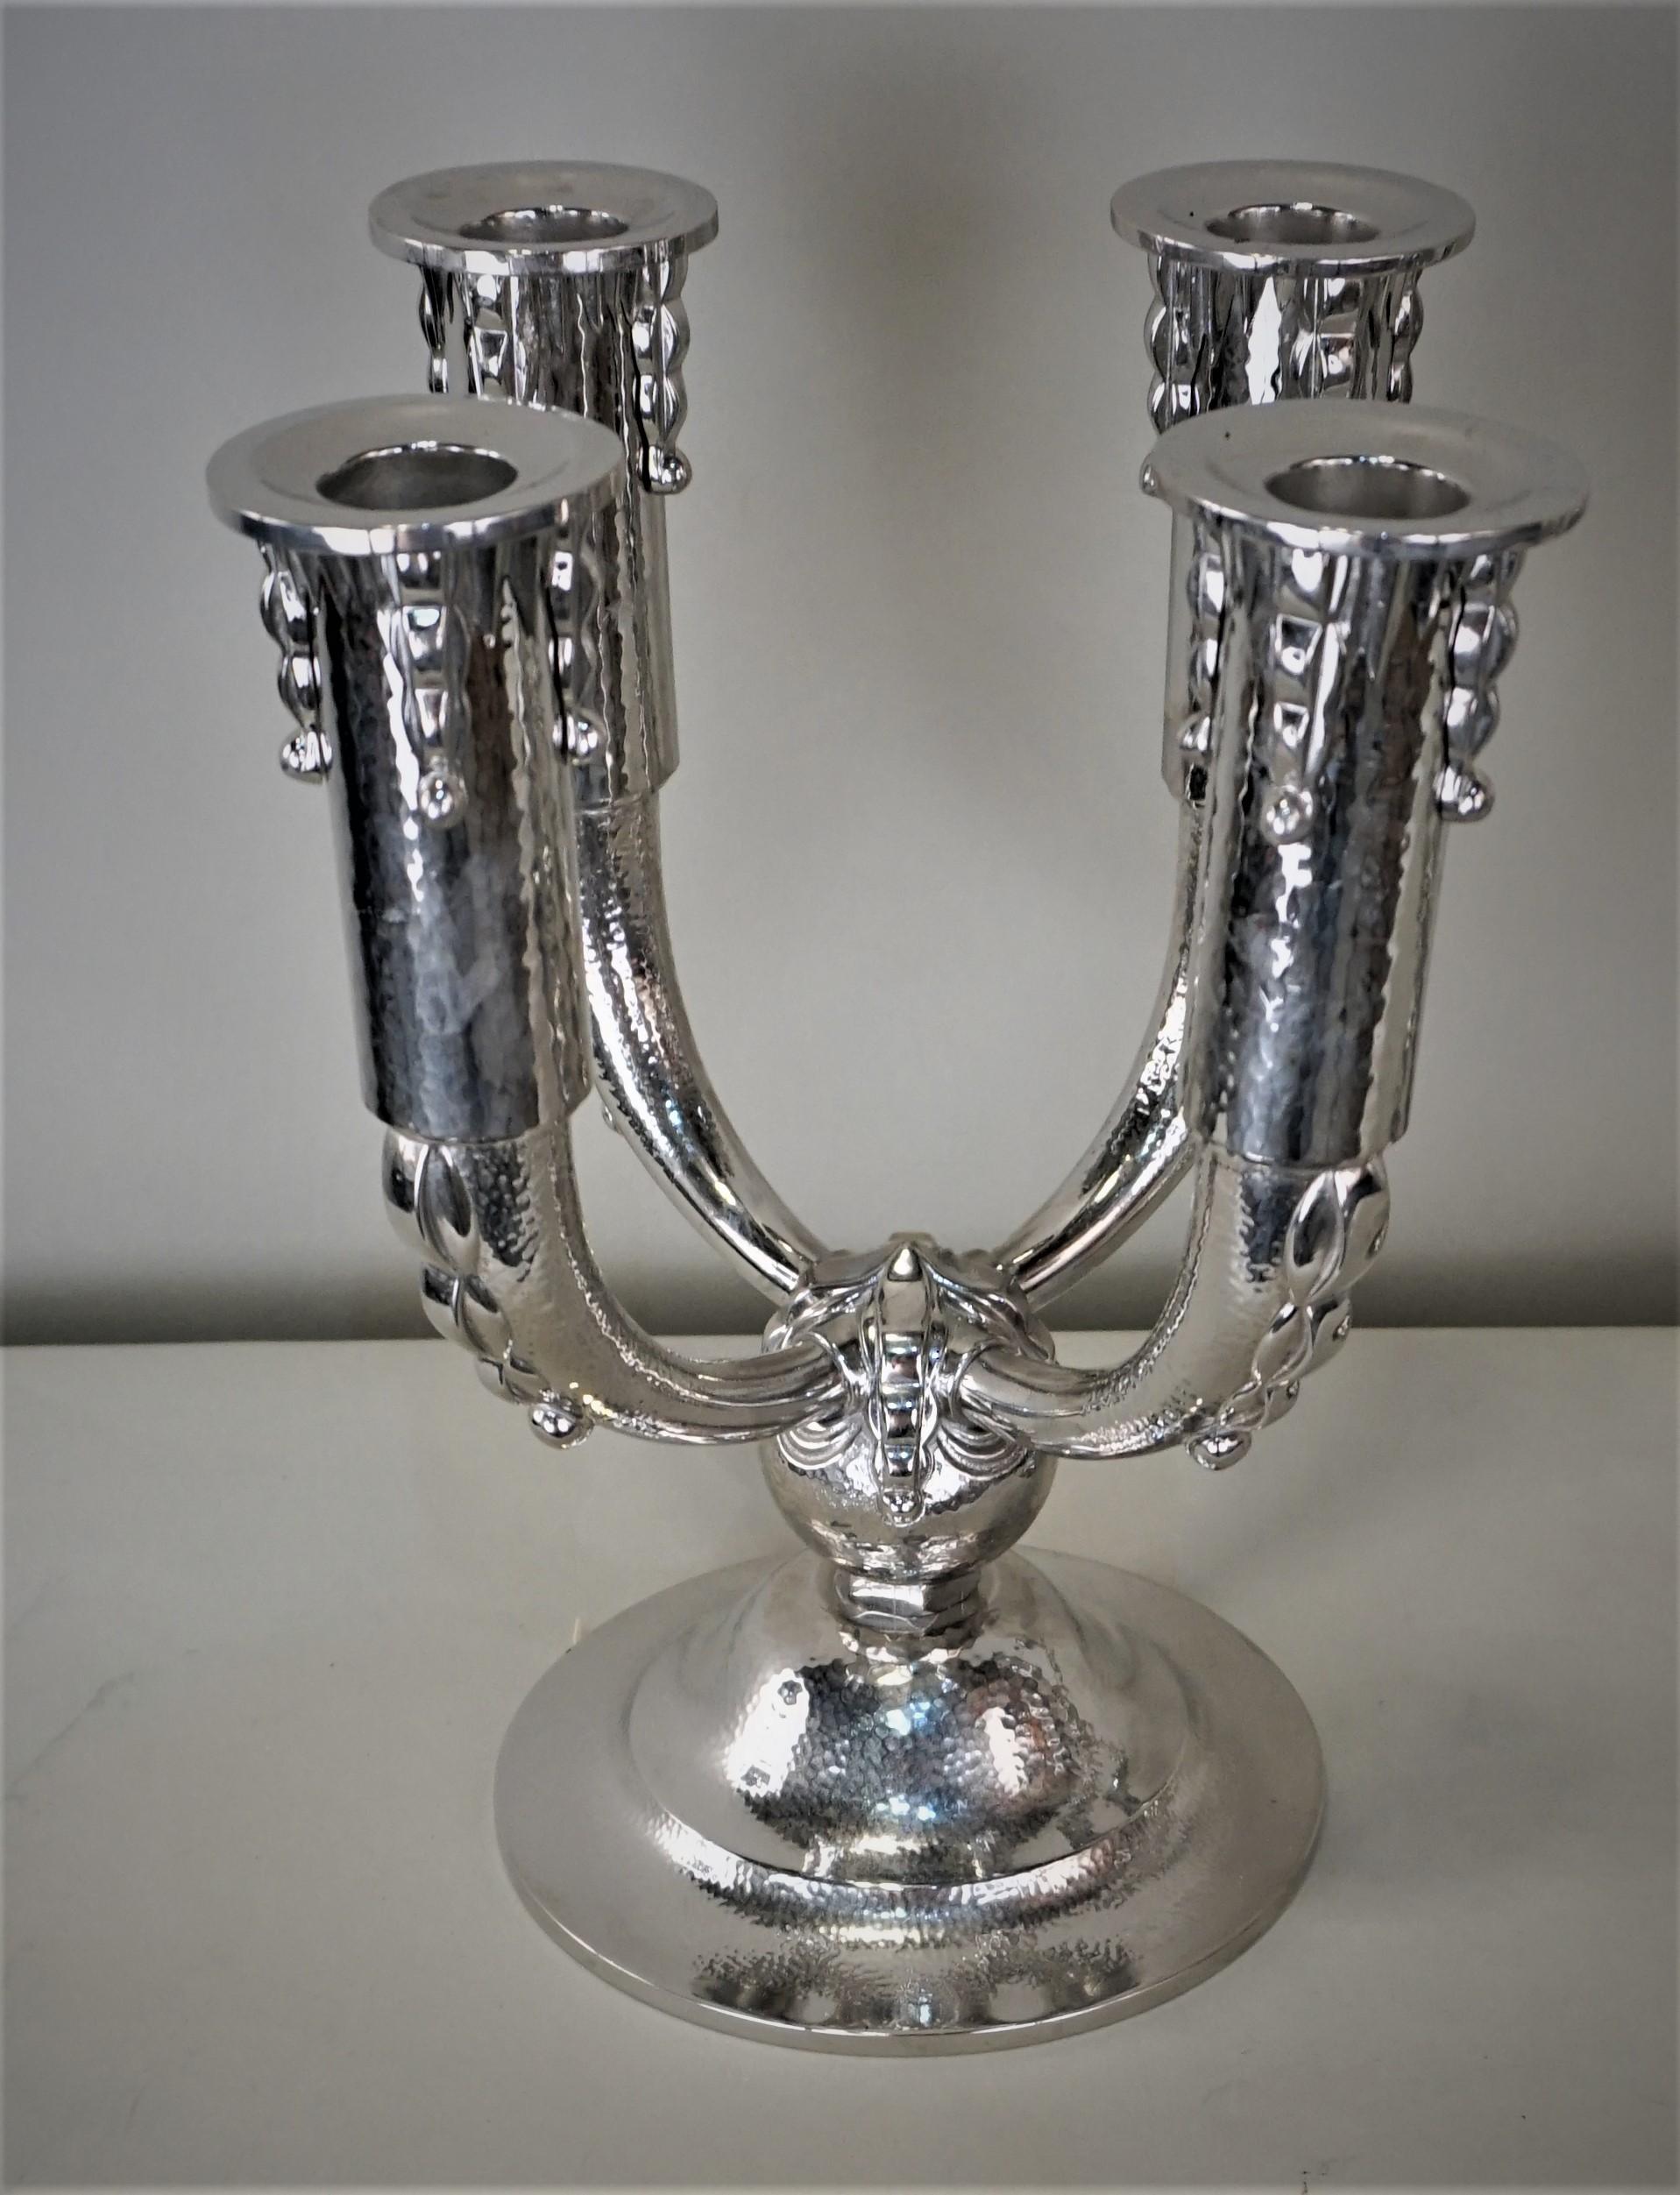 Pair of French Art Deco Candelabra In Good Condition For Sale In Fairfax, VA